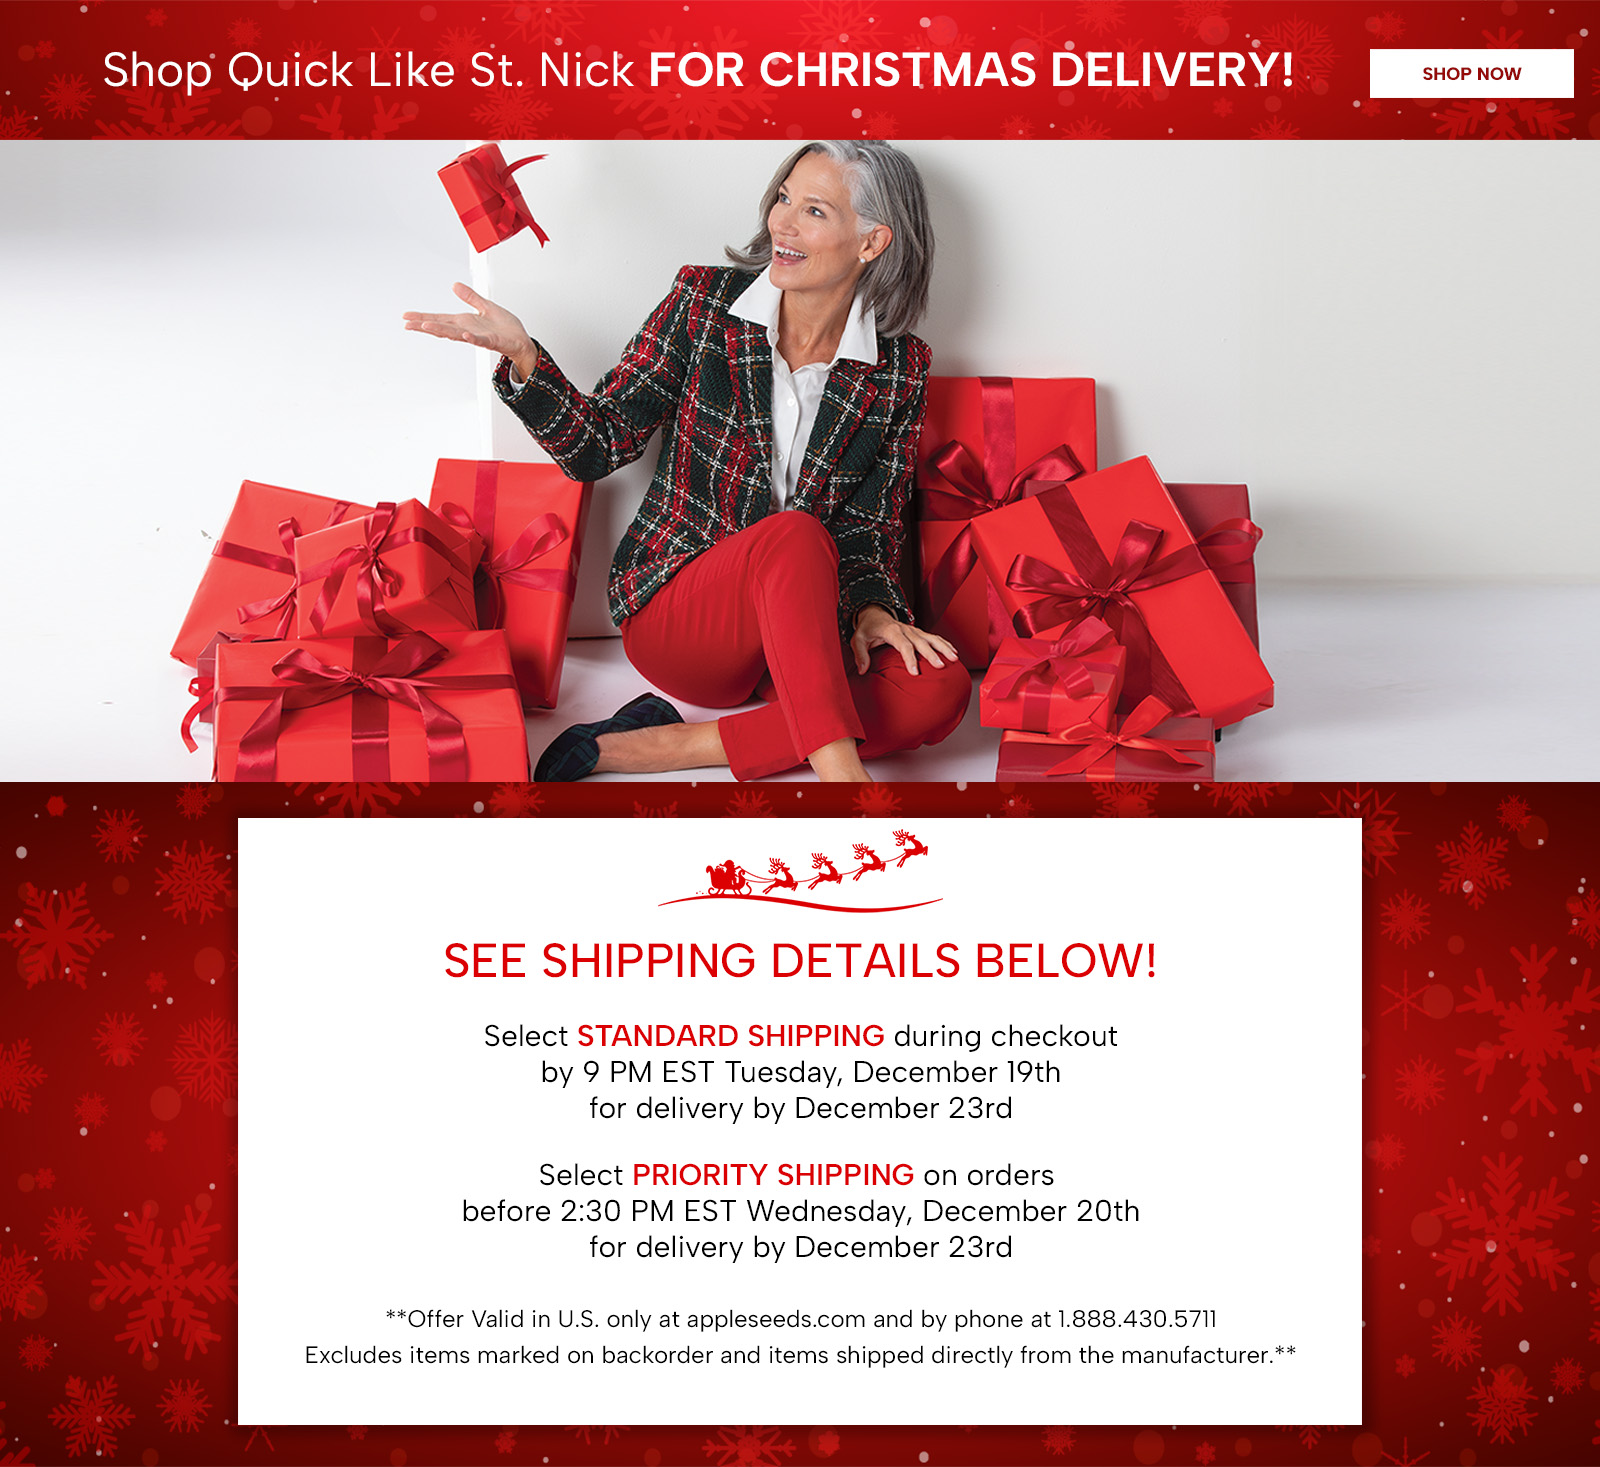 Shop Quick Like St. Nick for Delivery By Christmas